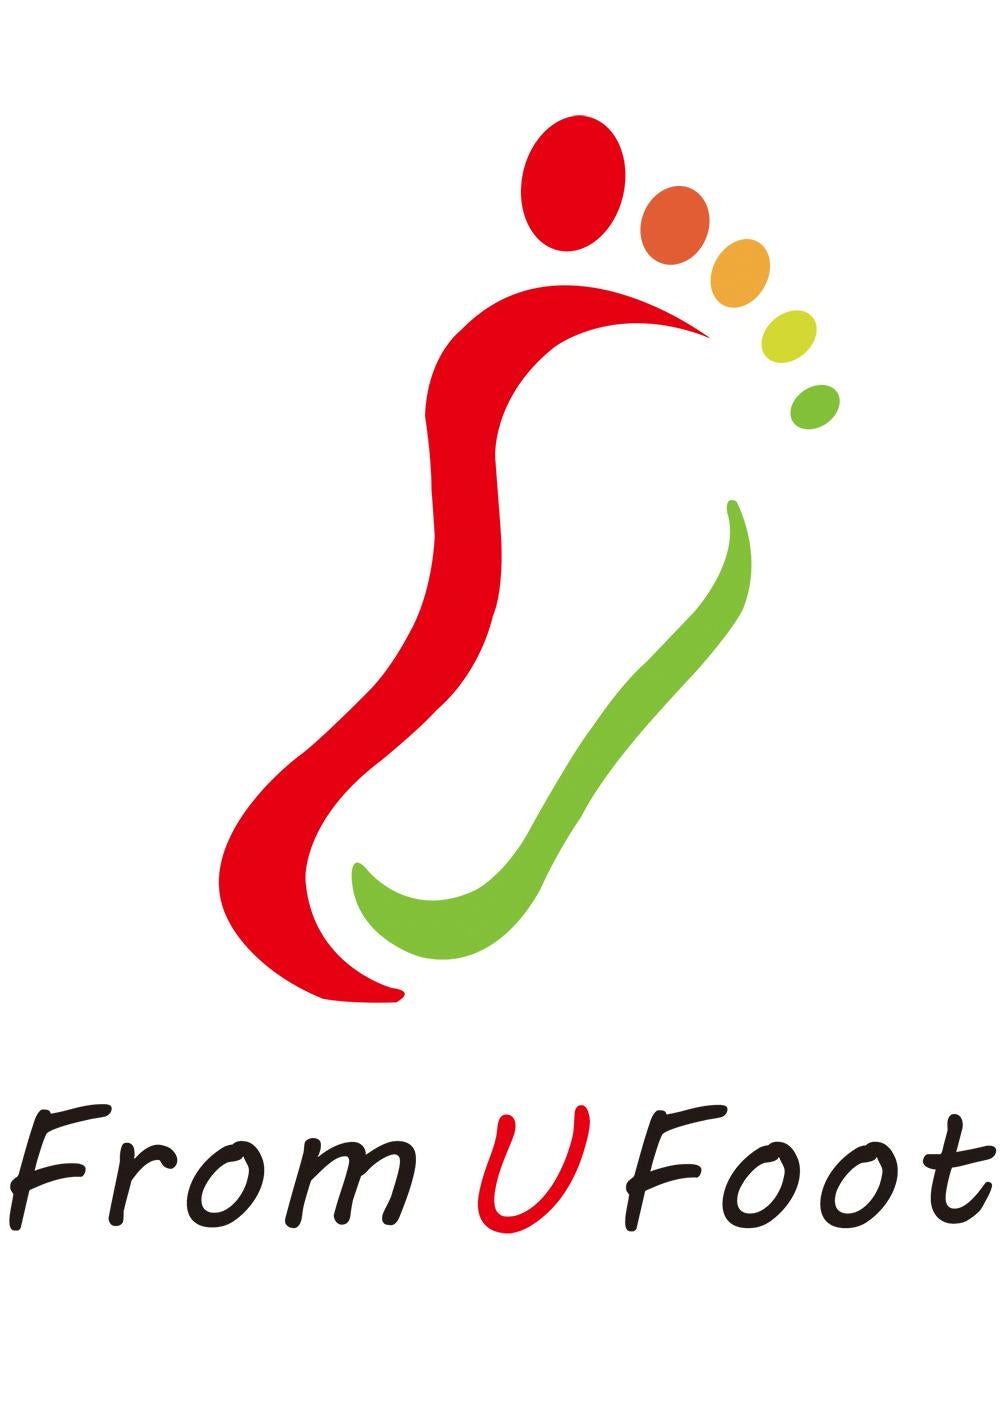 fromufoot